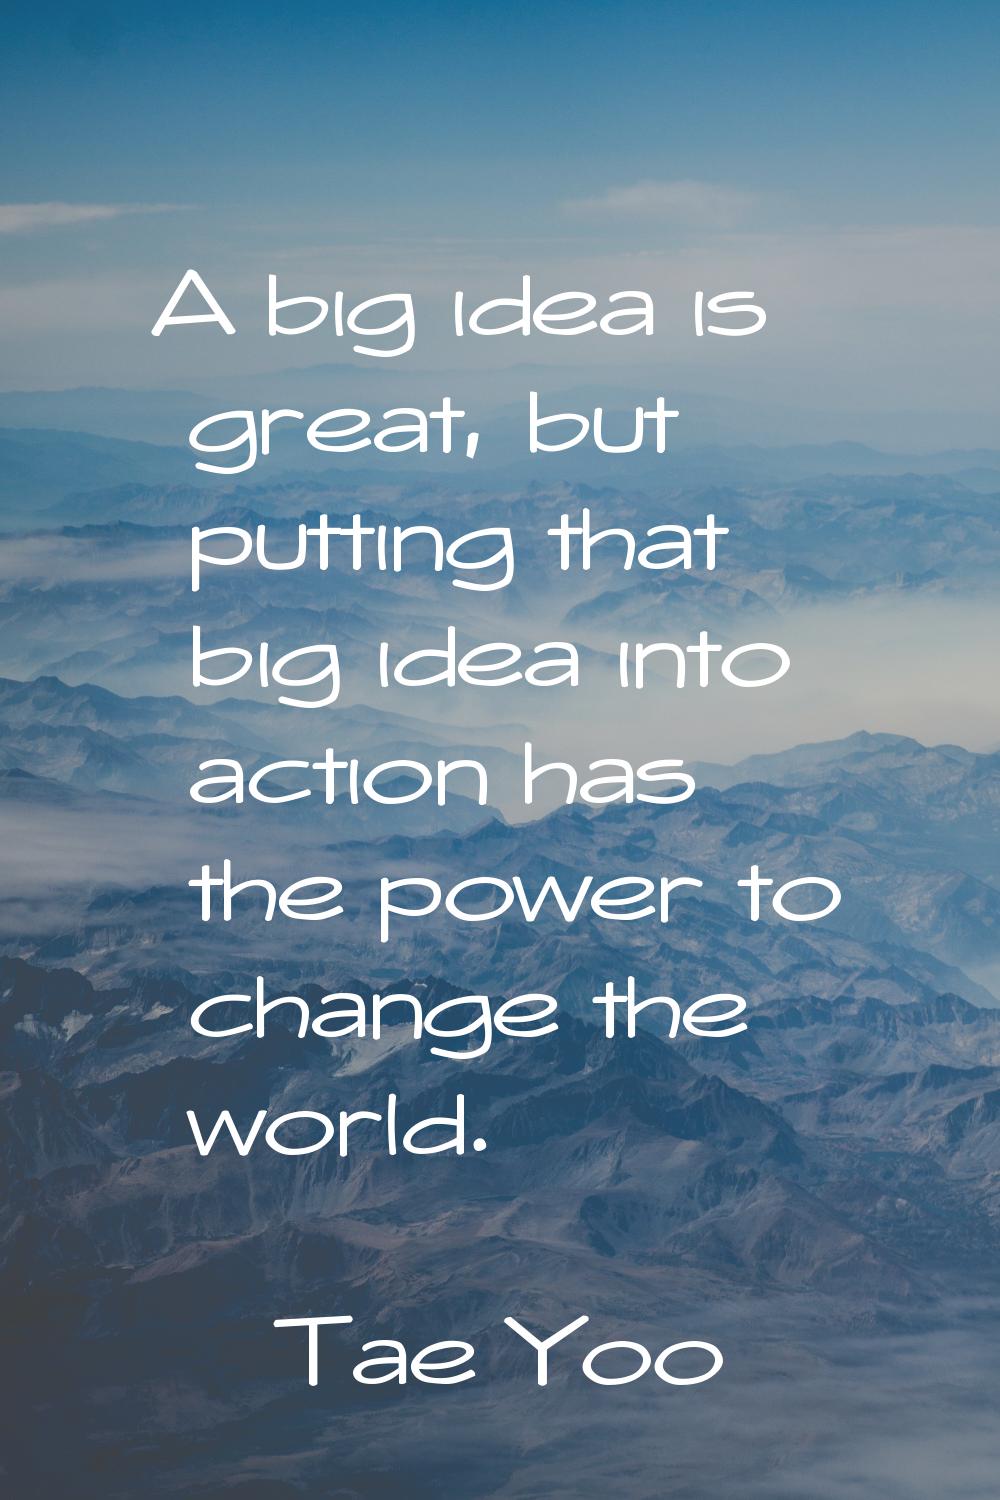 A big idea is great, but putting that big idea into action has the power to change the world.